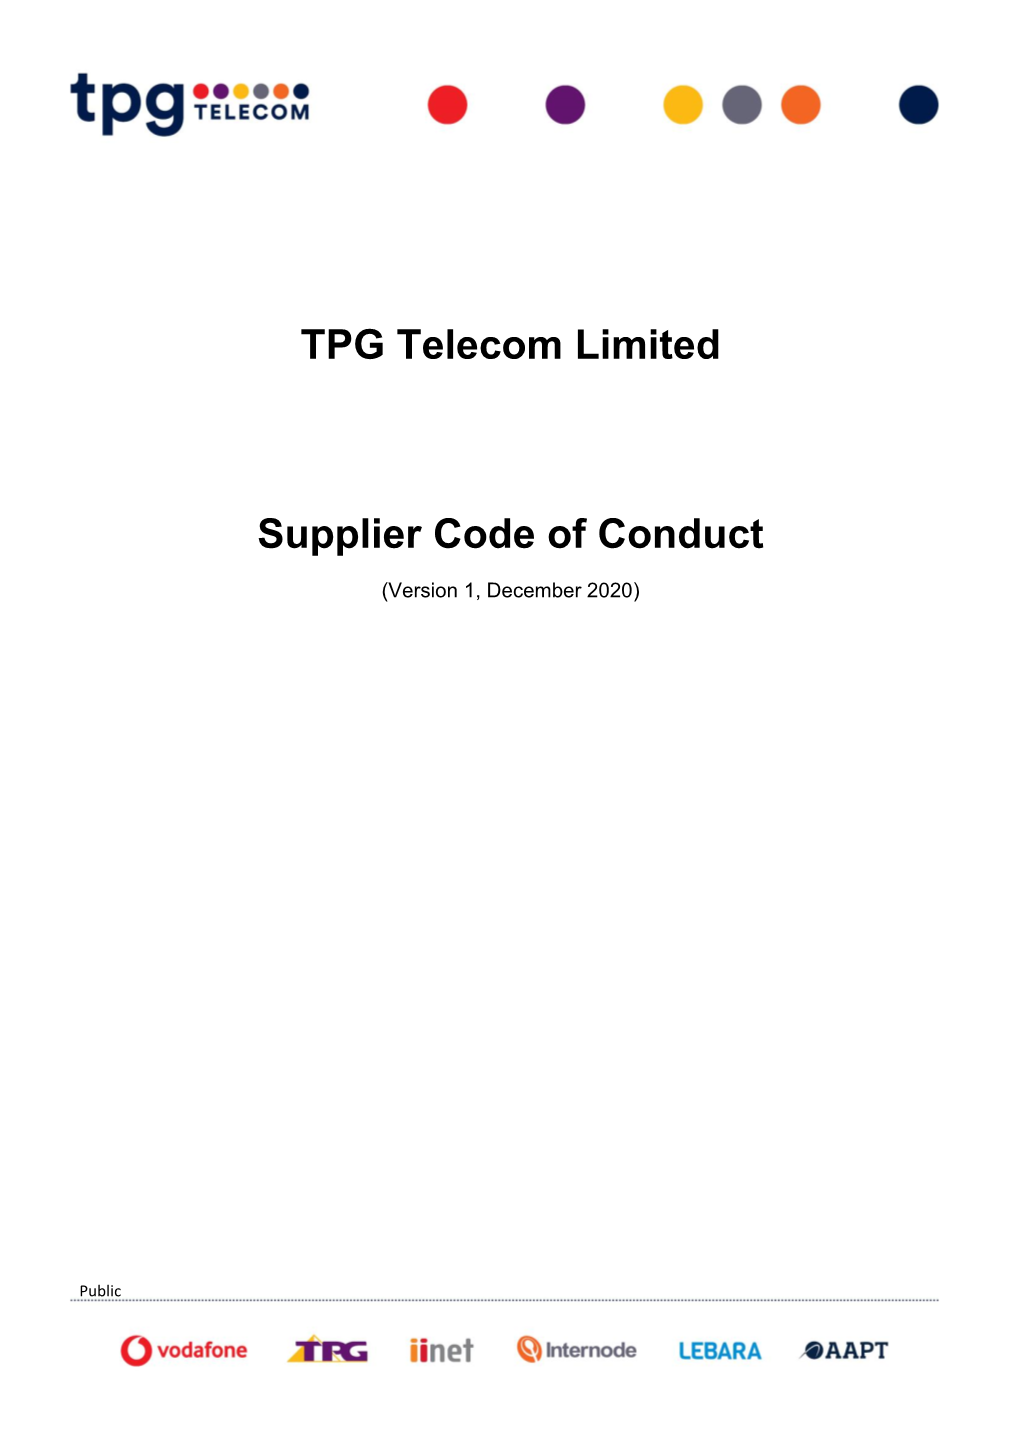 TPG Telecom Limited Supplier Code of Conduct